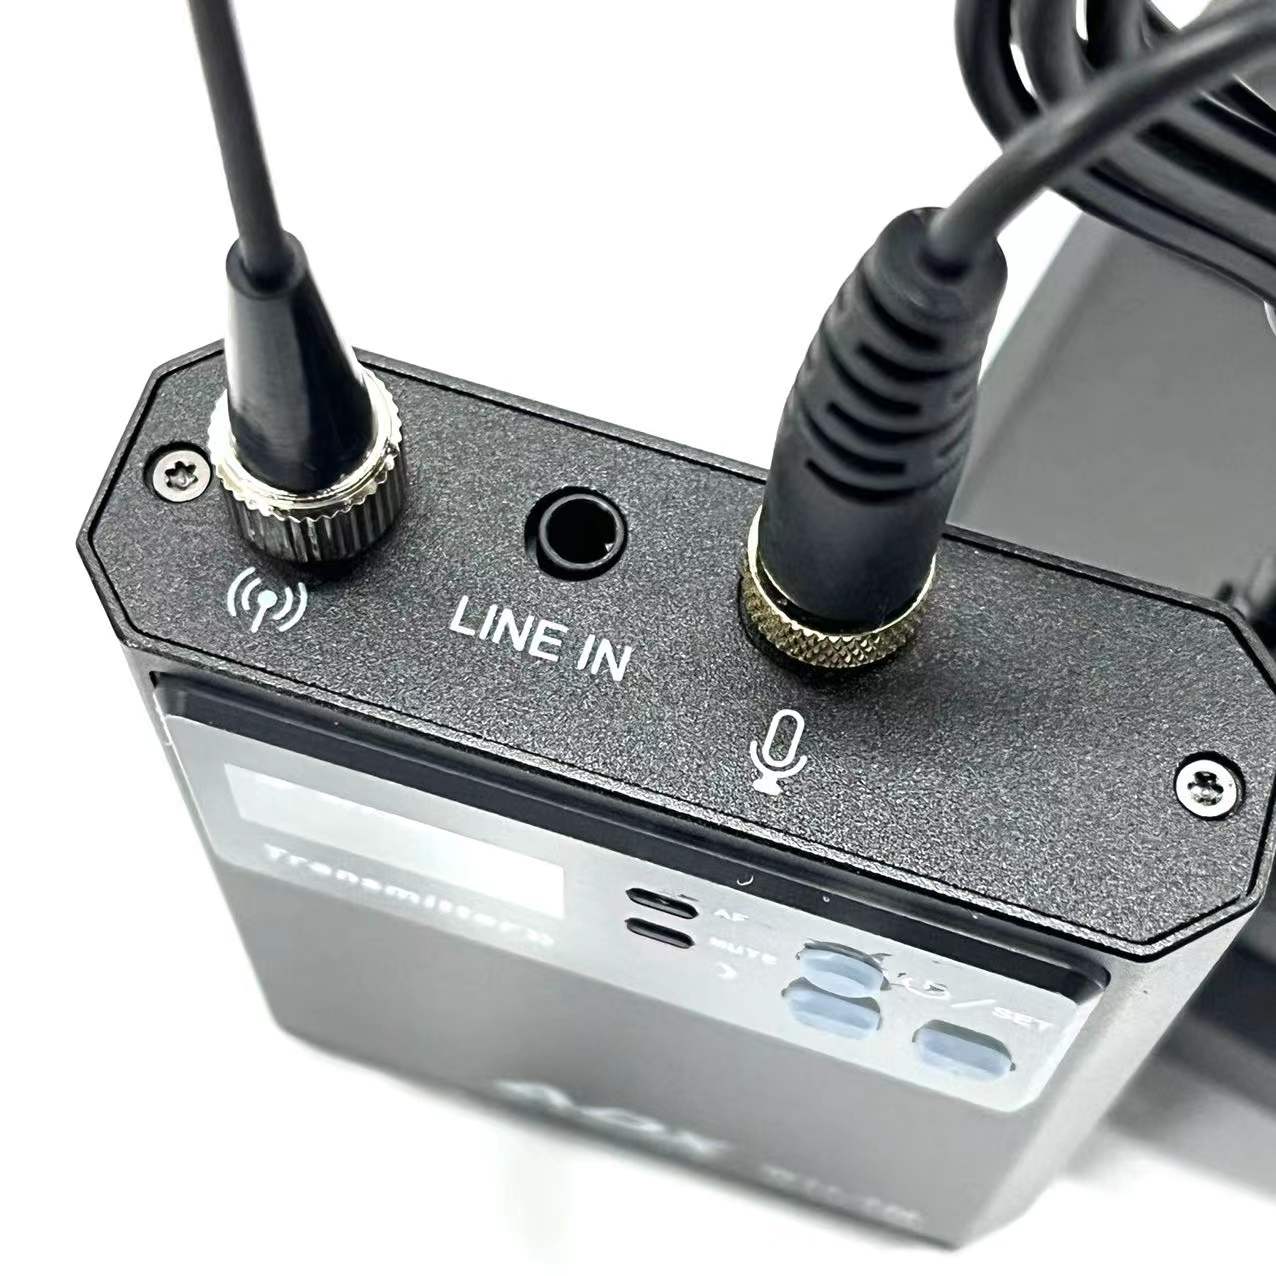 New Black Wireless Aluminium alloy Audio Pickup with Acoustic Clarity for Video Conferencing